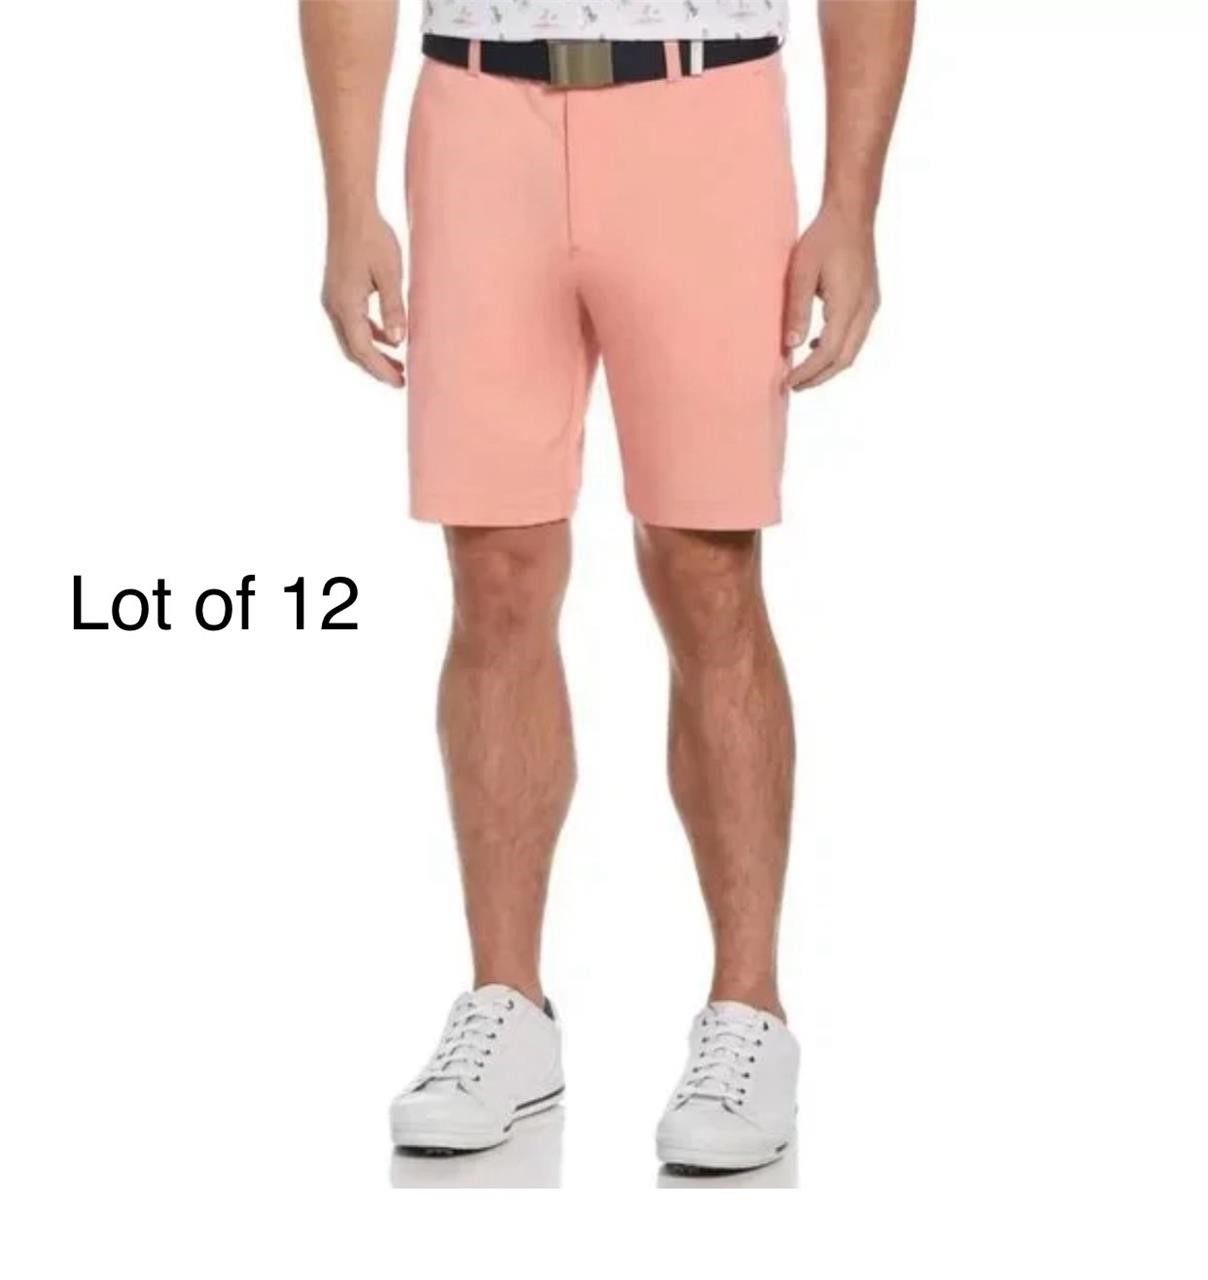 Size 30 LOT OF 12 MENS GOLF SHORTS PINK